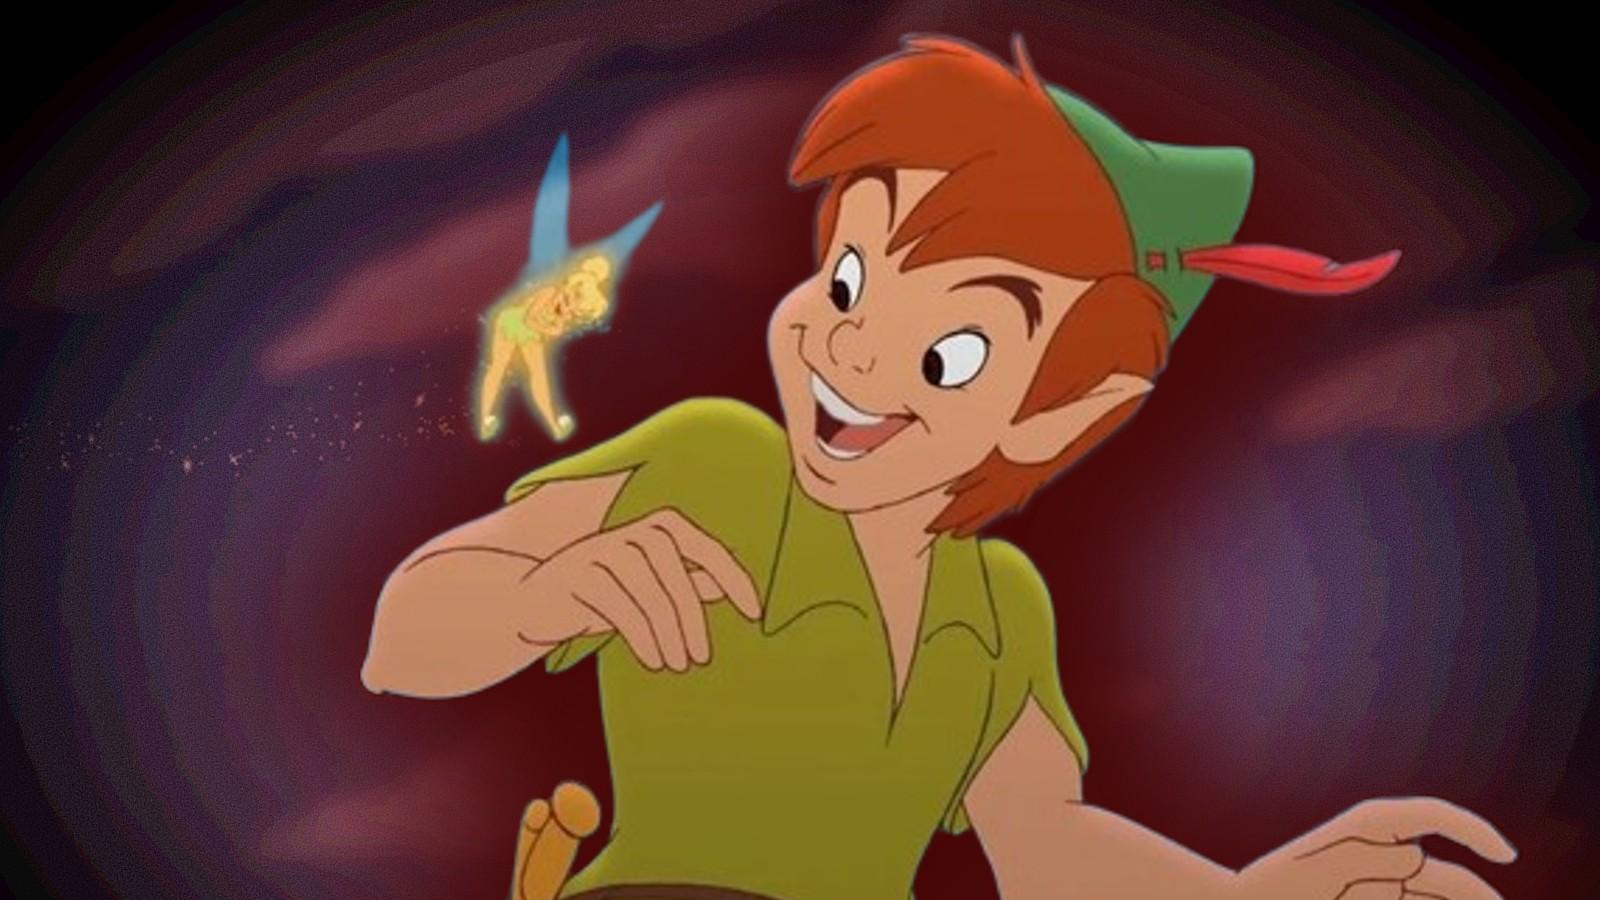 Peter Pan horror movie to feature “obese” drug addict Tinkerbell